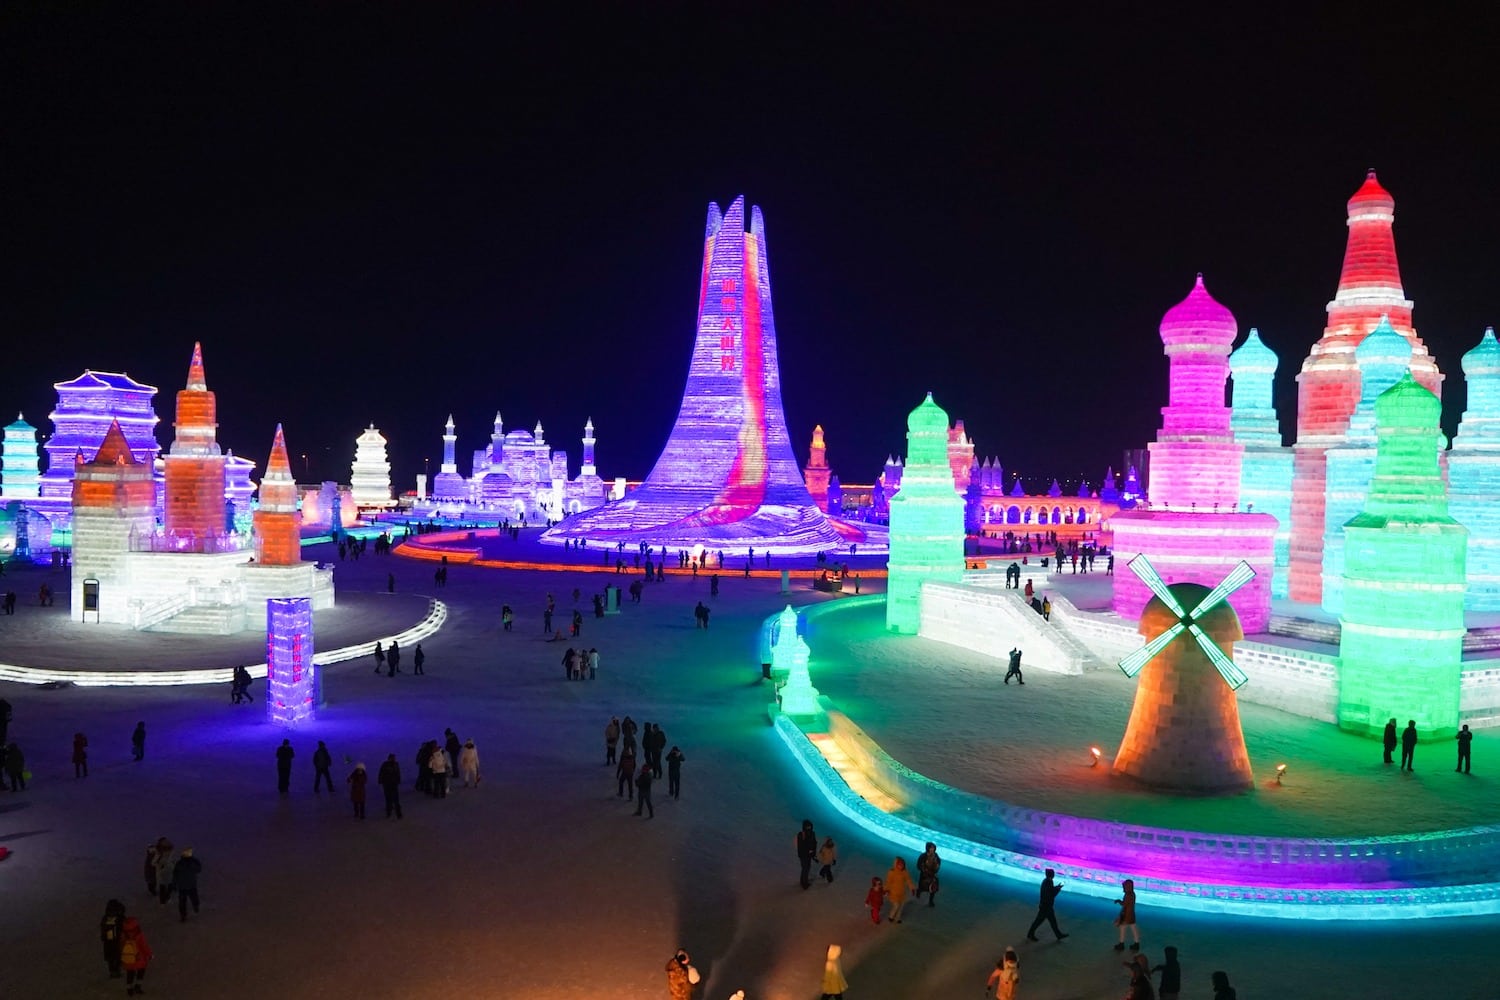 Why You Should Add The Harbin Ice and Snow Festival to Your Bucket List ❄